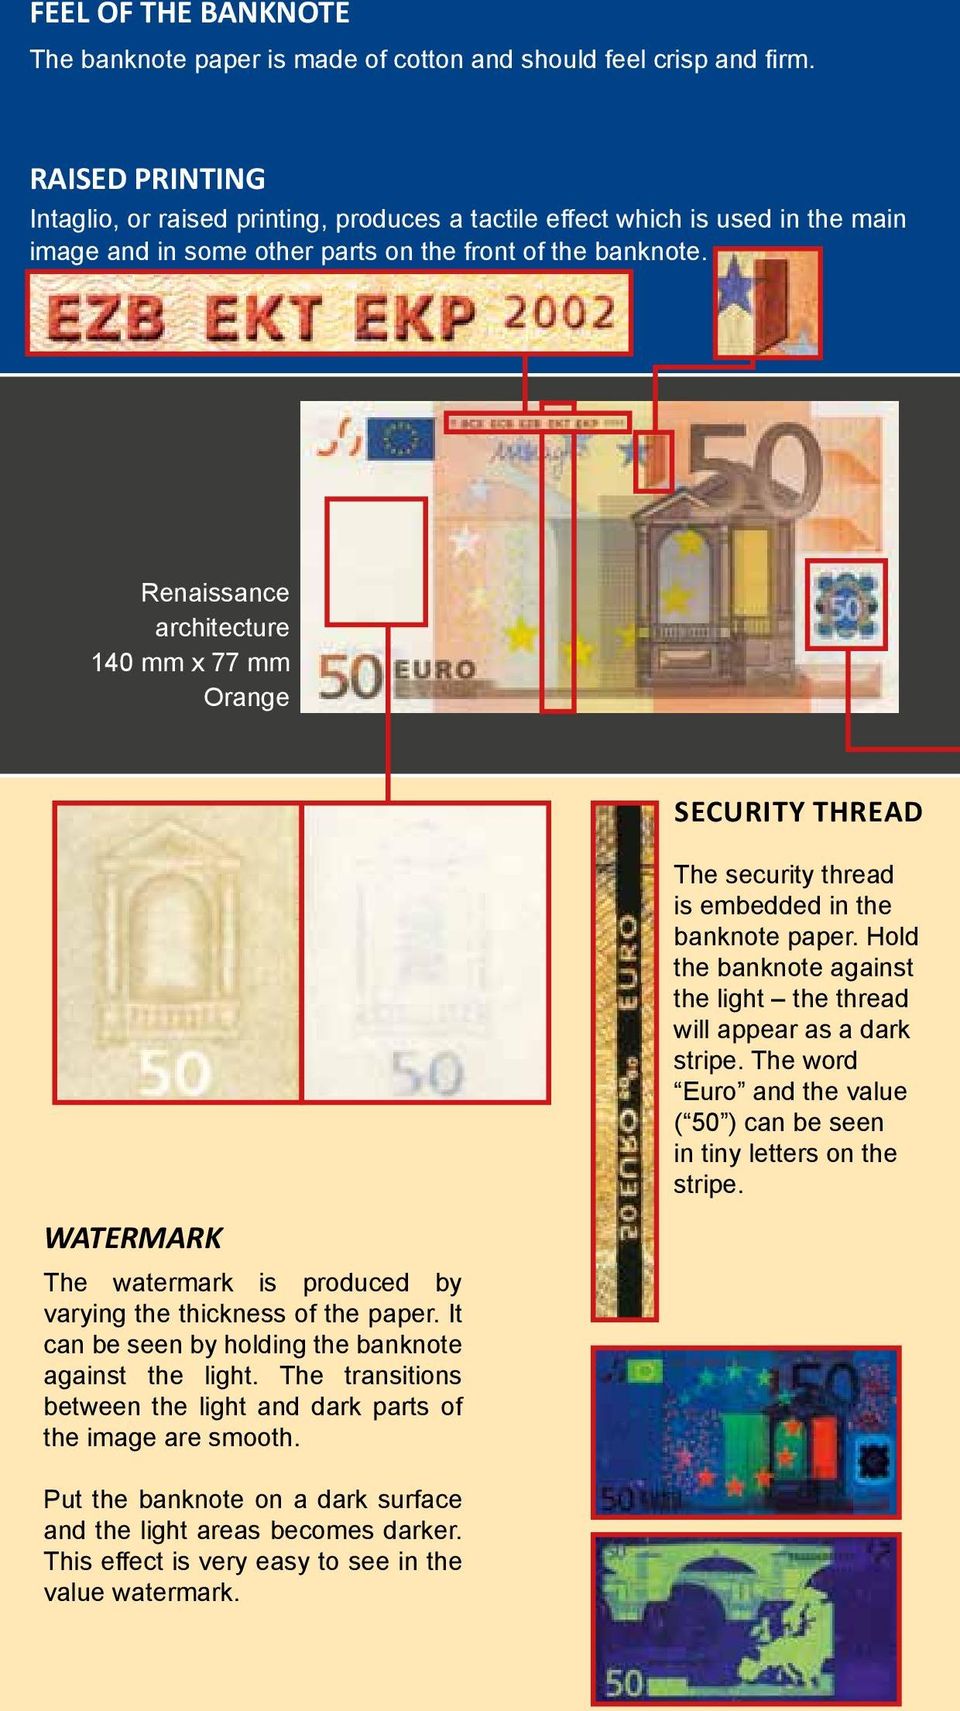 Renaissance architecture 140 mm x 77 mm Orange SECURITY THREAD WATERMARK The watermark is produced by varying the thickness of the paper. It can be seen by holding the banknote against the light.